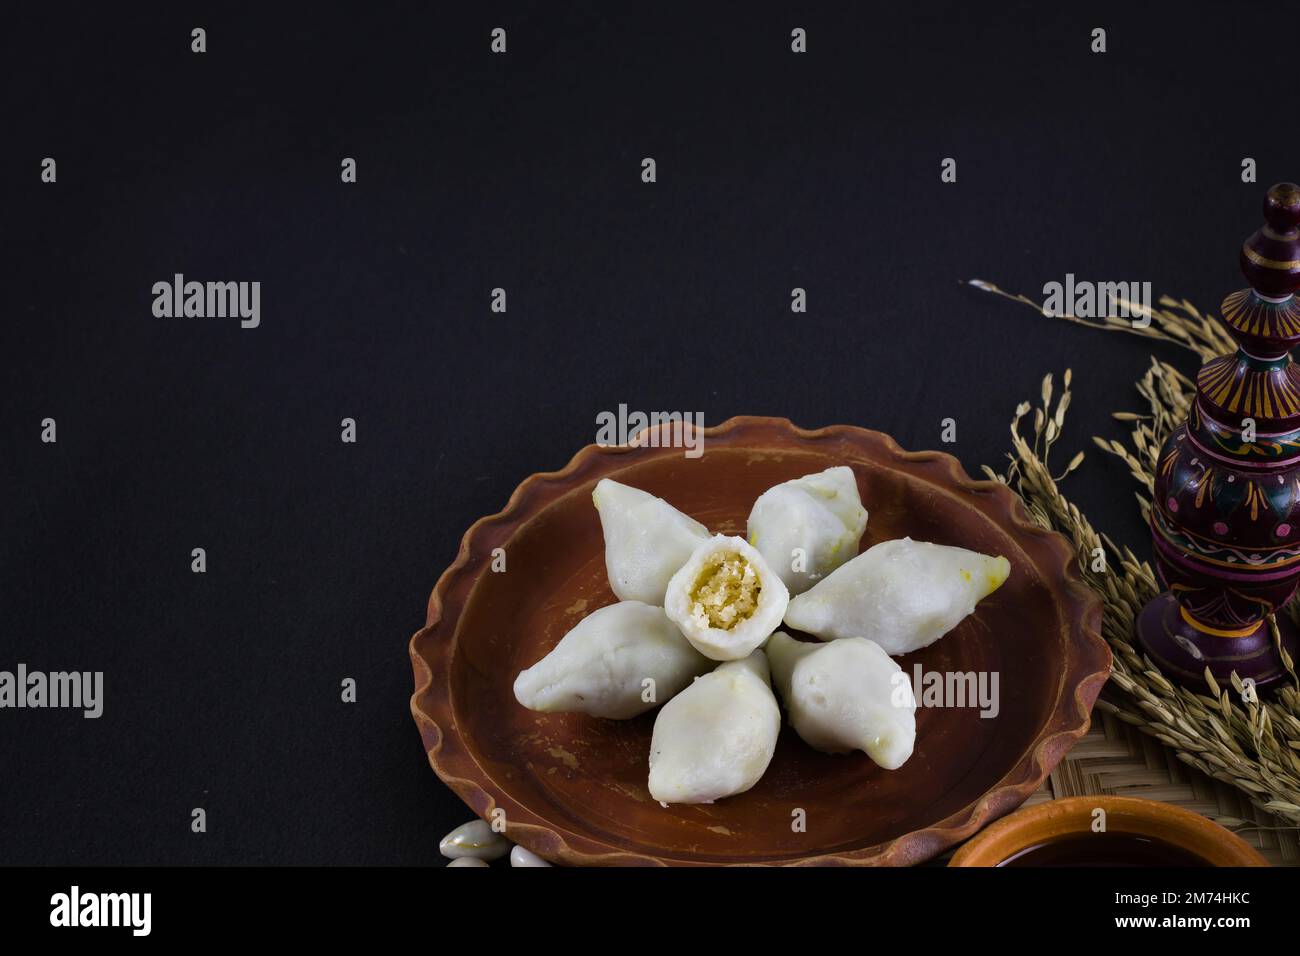 puli pithe or bengali rice flour dumplings with coconut fillings served on a clay plate with jaggery. shot against black background.this traditional d Stock Photo